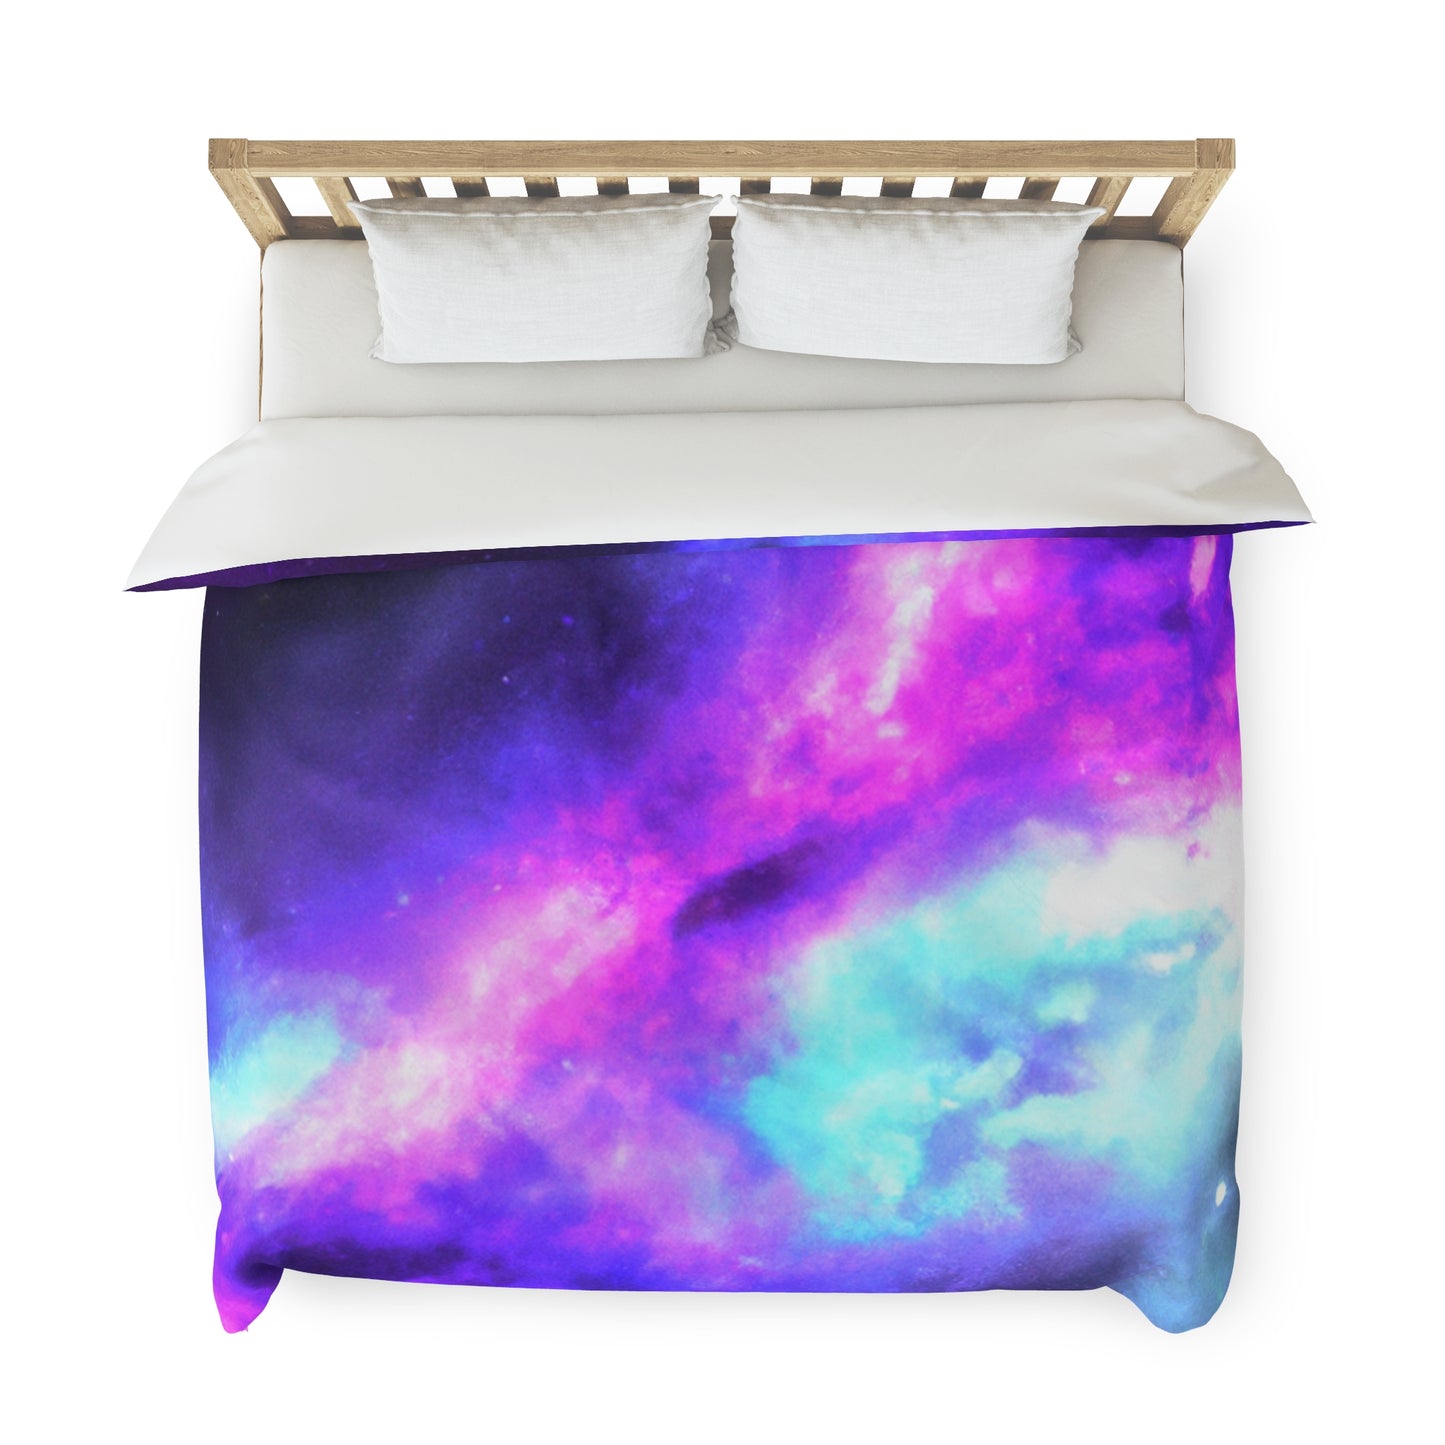 Dreamy Maybelle - Astronomy Duvet Bed Cover